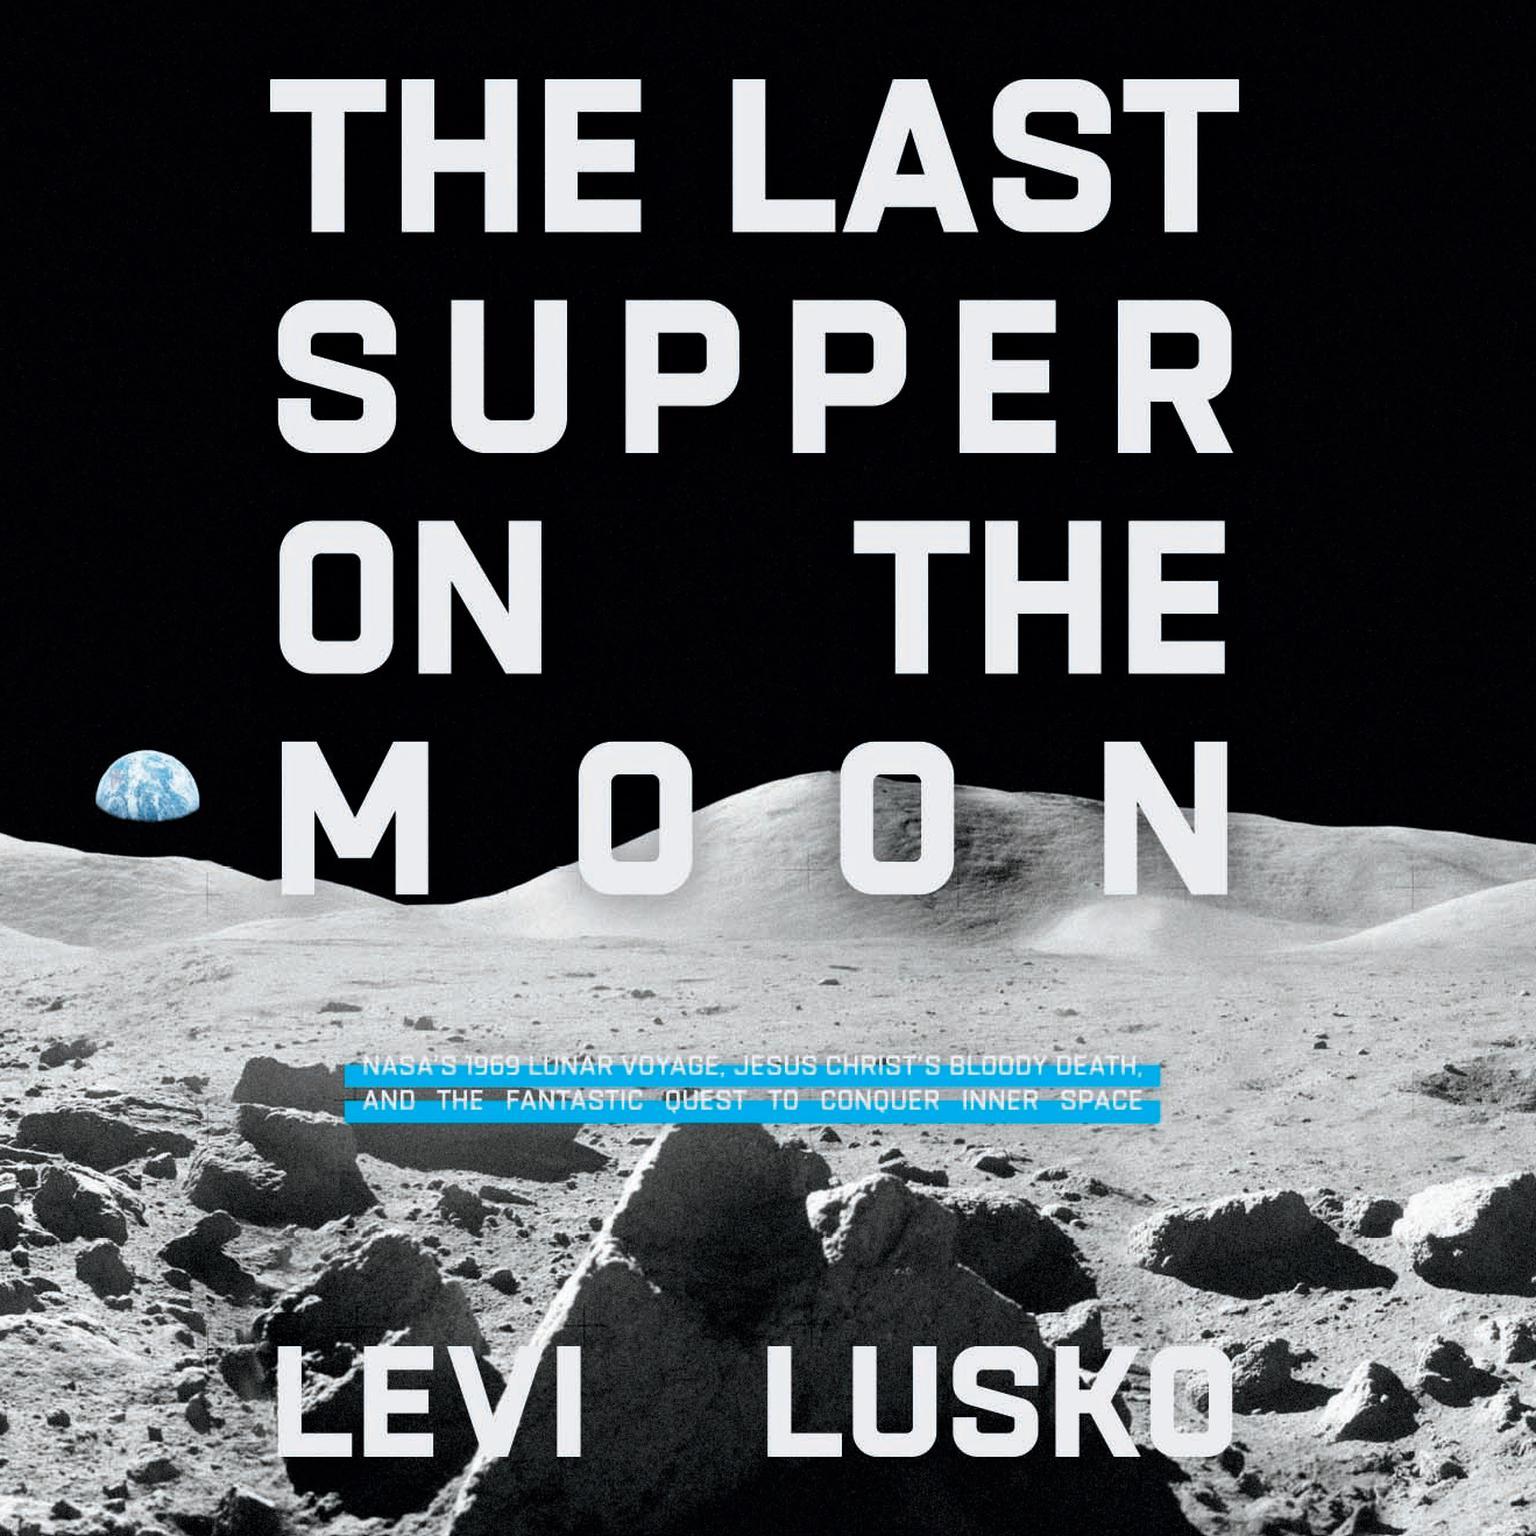 The Last Supper on the Moon: NASAs 1969 Lunar Voyage, Jesus Christs Bloody Death, and the Fantastic Quest to Conquer Inner Space Audiobook, by Levi Lusko